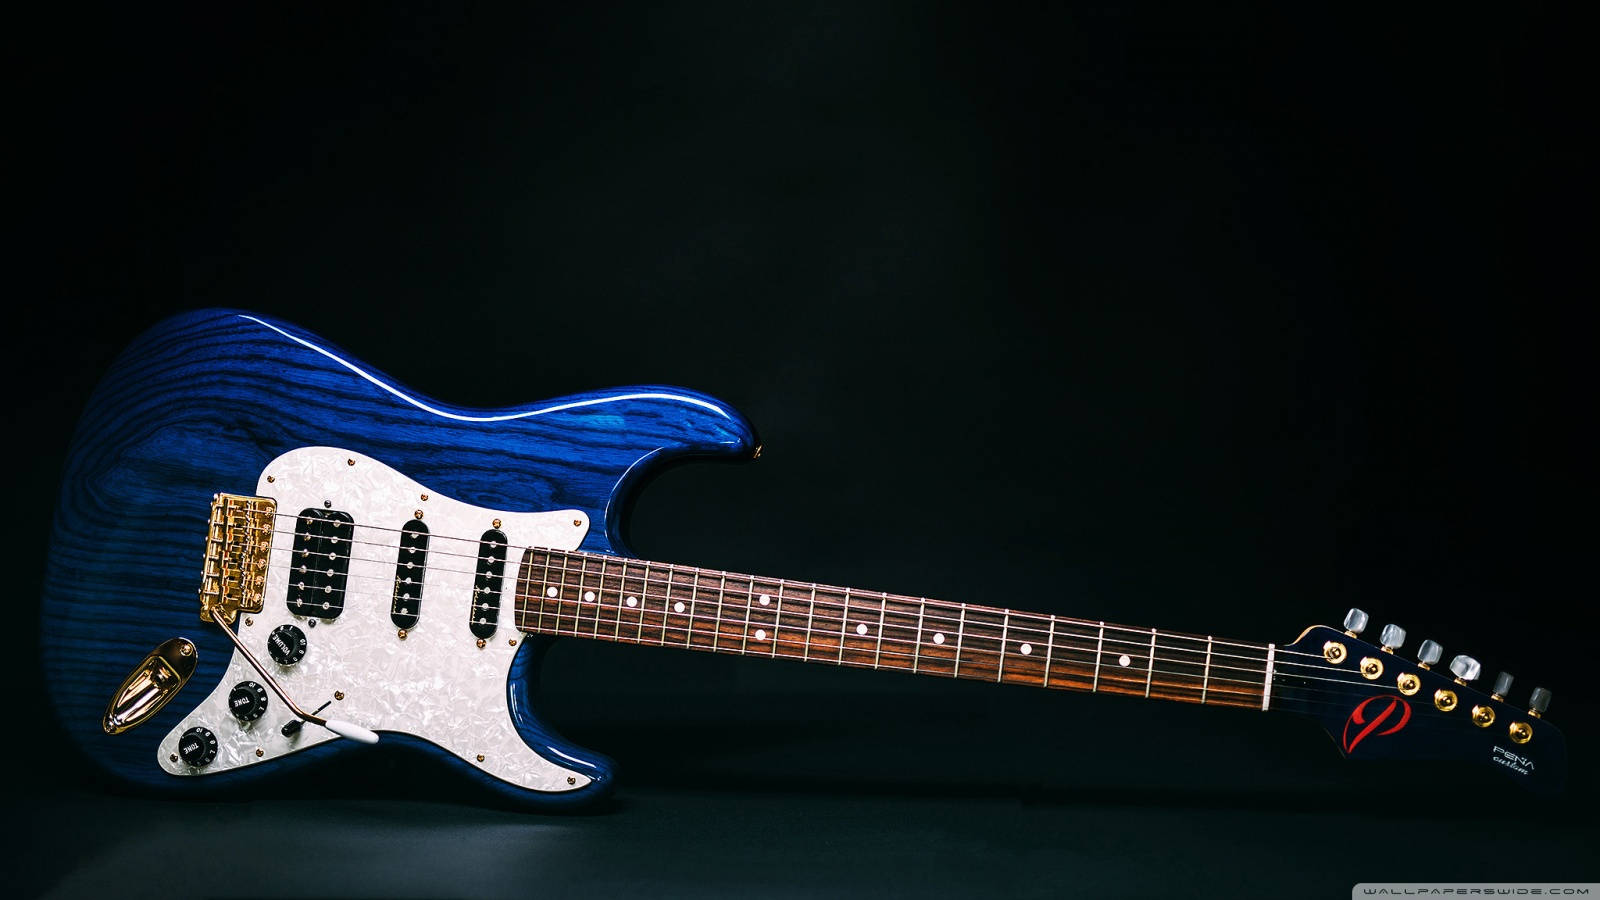 Get Ready To Jam Out With A Royal Blue Electric Guitar Wallpaper